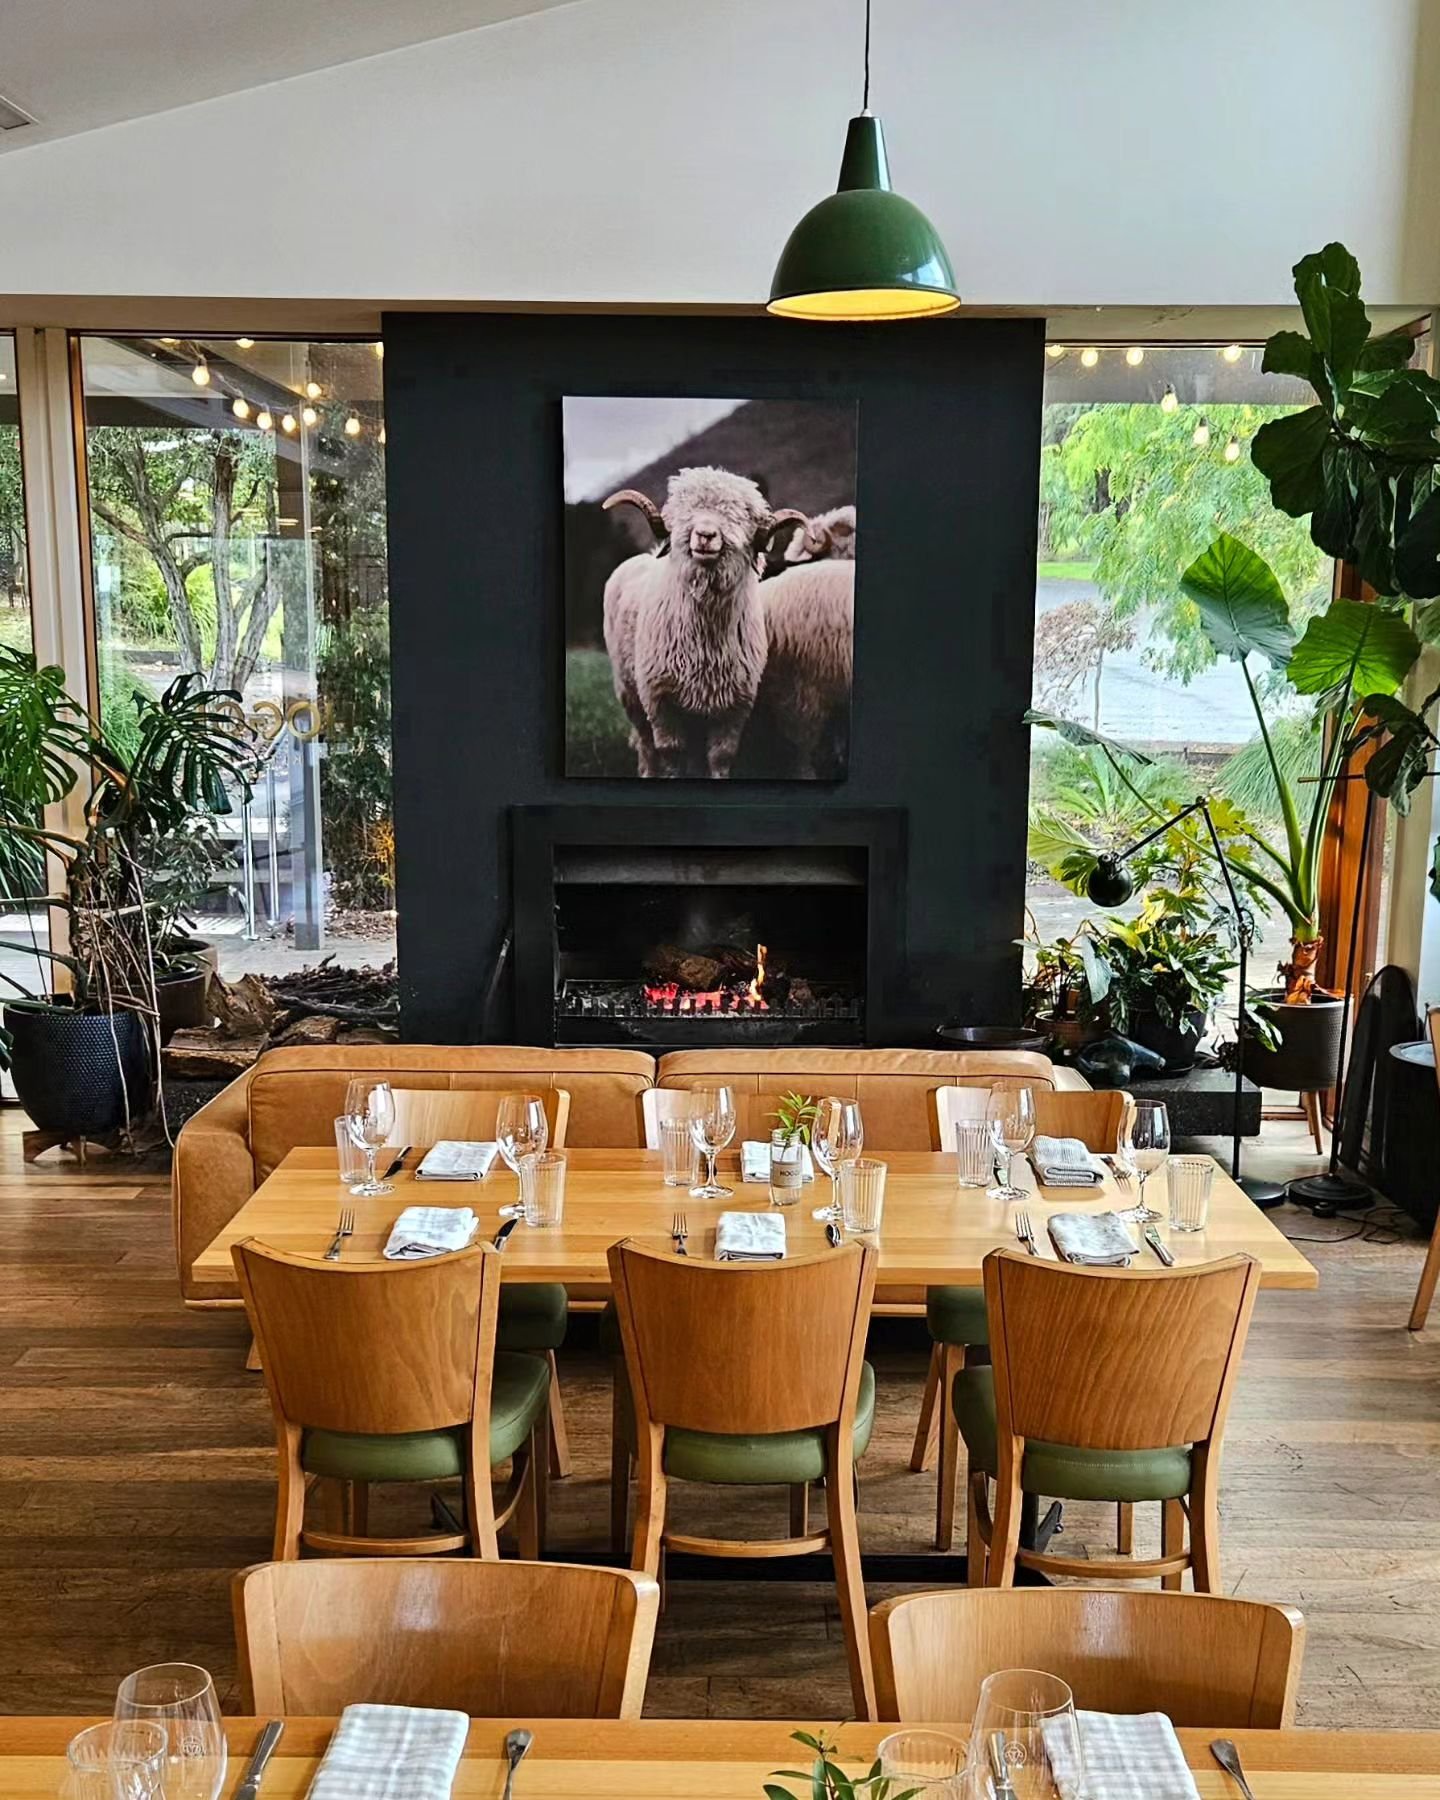 Back tomorrow from 12pm for a weekend of long Autumn lunches and cosy dinners by the fire. Have you booked your table yet? 

www.hogget.com.au |  5623 2211

#autumn #cosy #lunch #dinner #restaurant #Gippsland #warragul